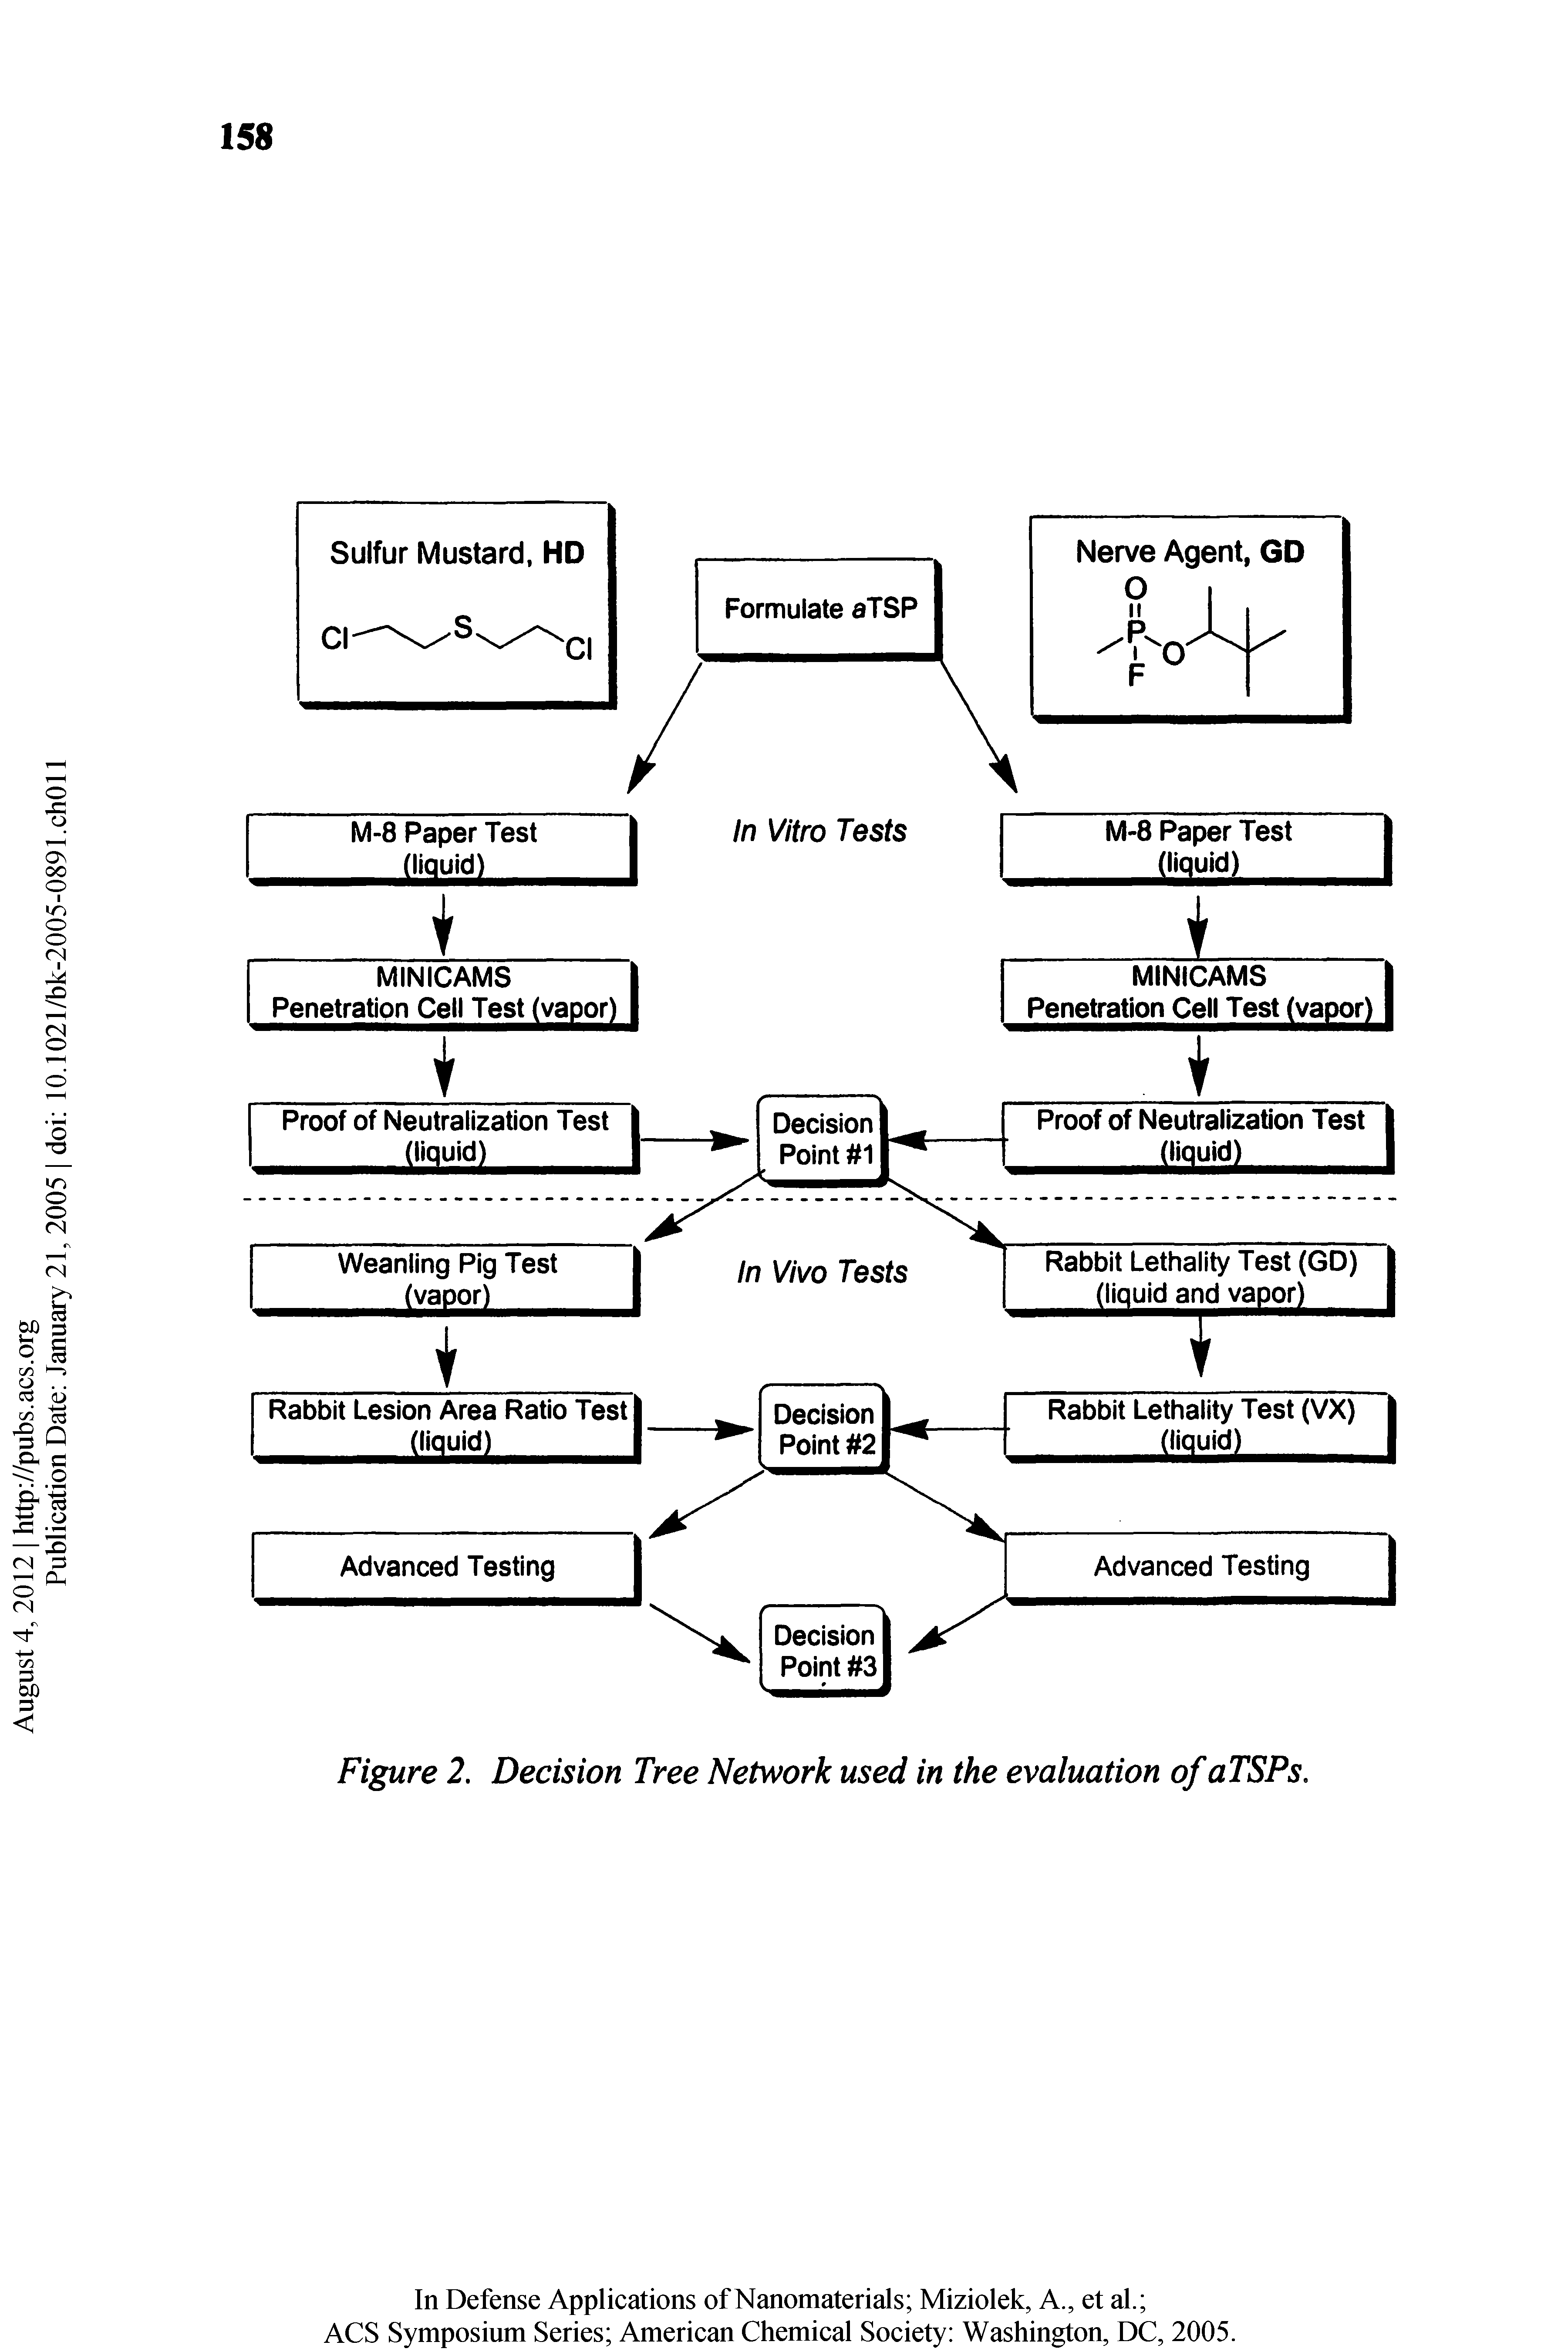 Figure 2. Decision Tree Network used in the evaluation of aTSPs.